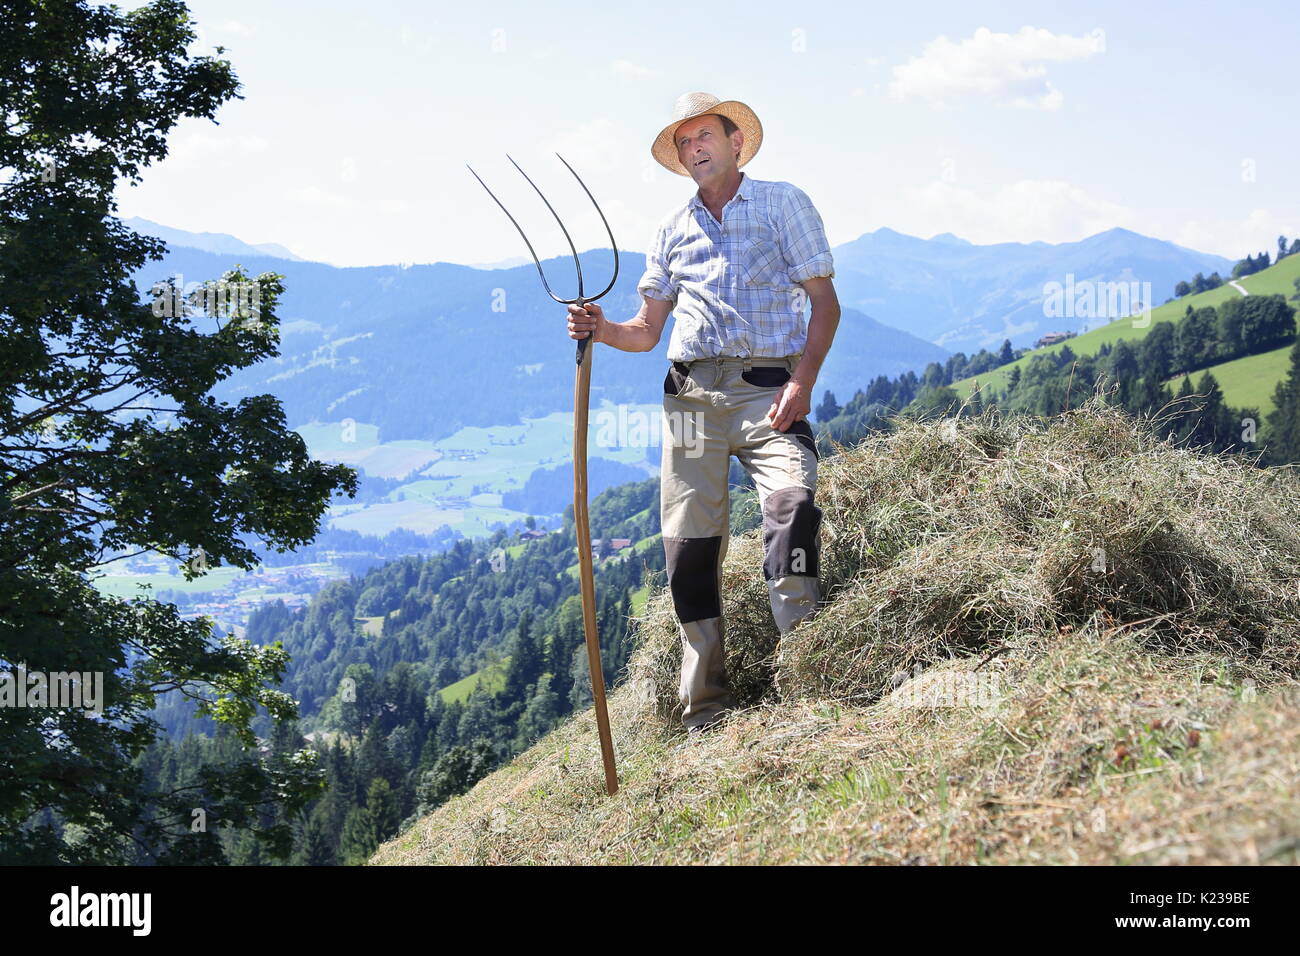 A Mountain farmer with pitchfork harvesting hay Stock Photo